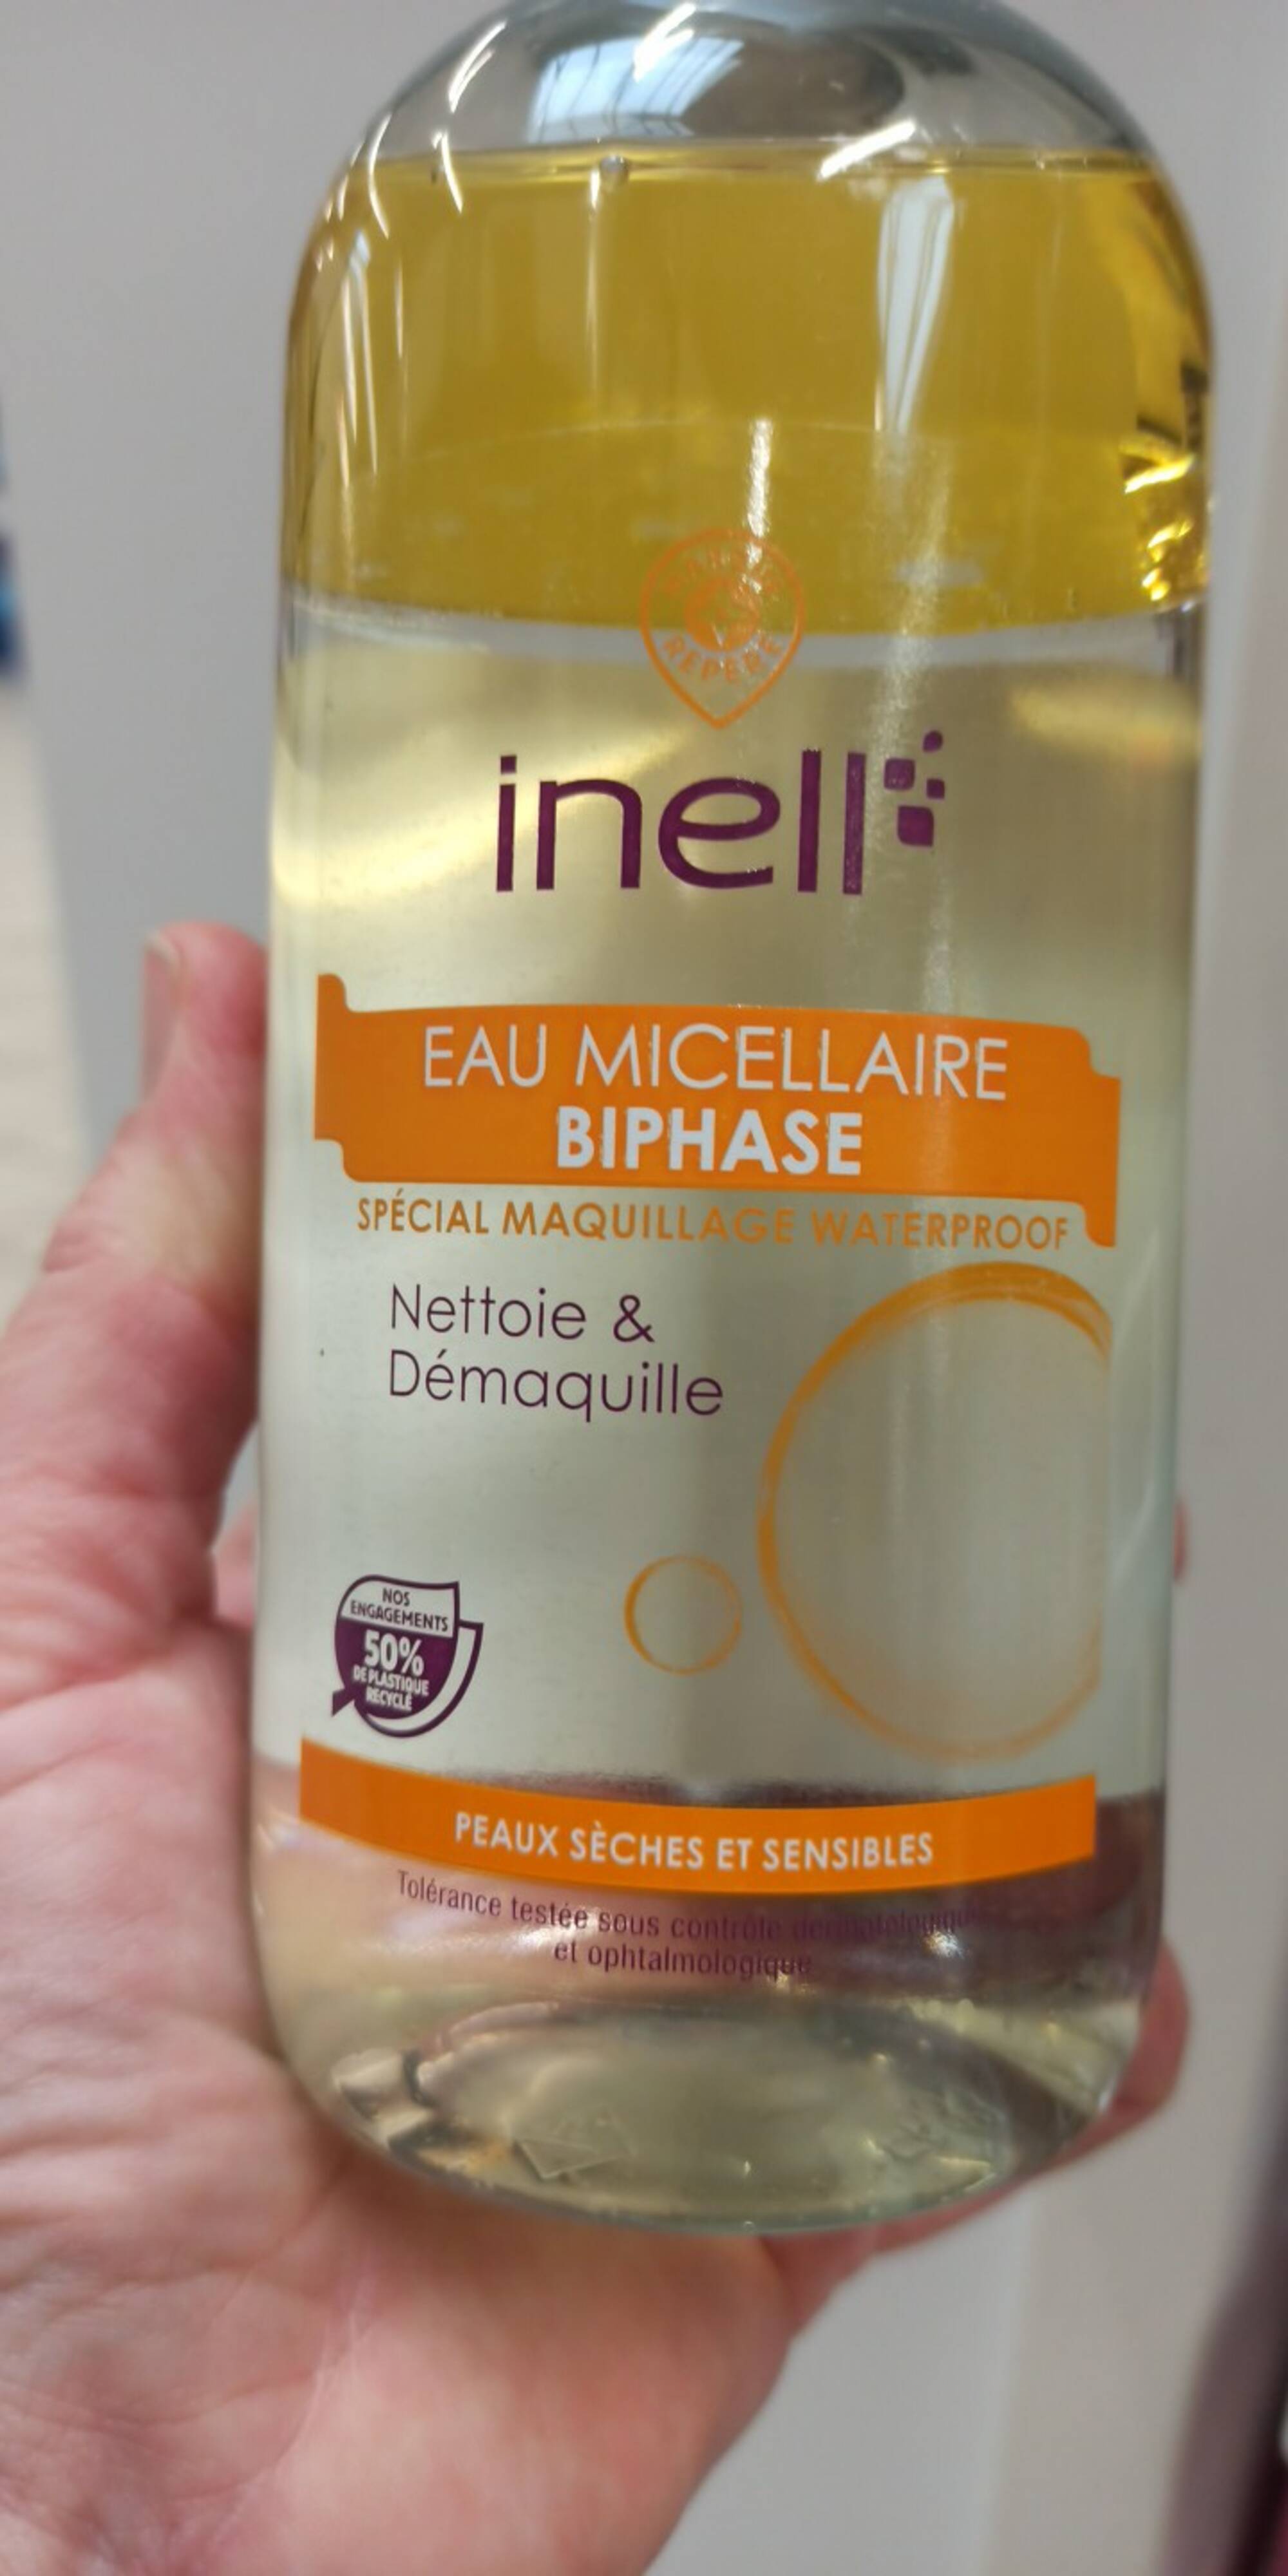 INELL - Eau micellaire biphase